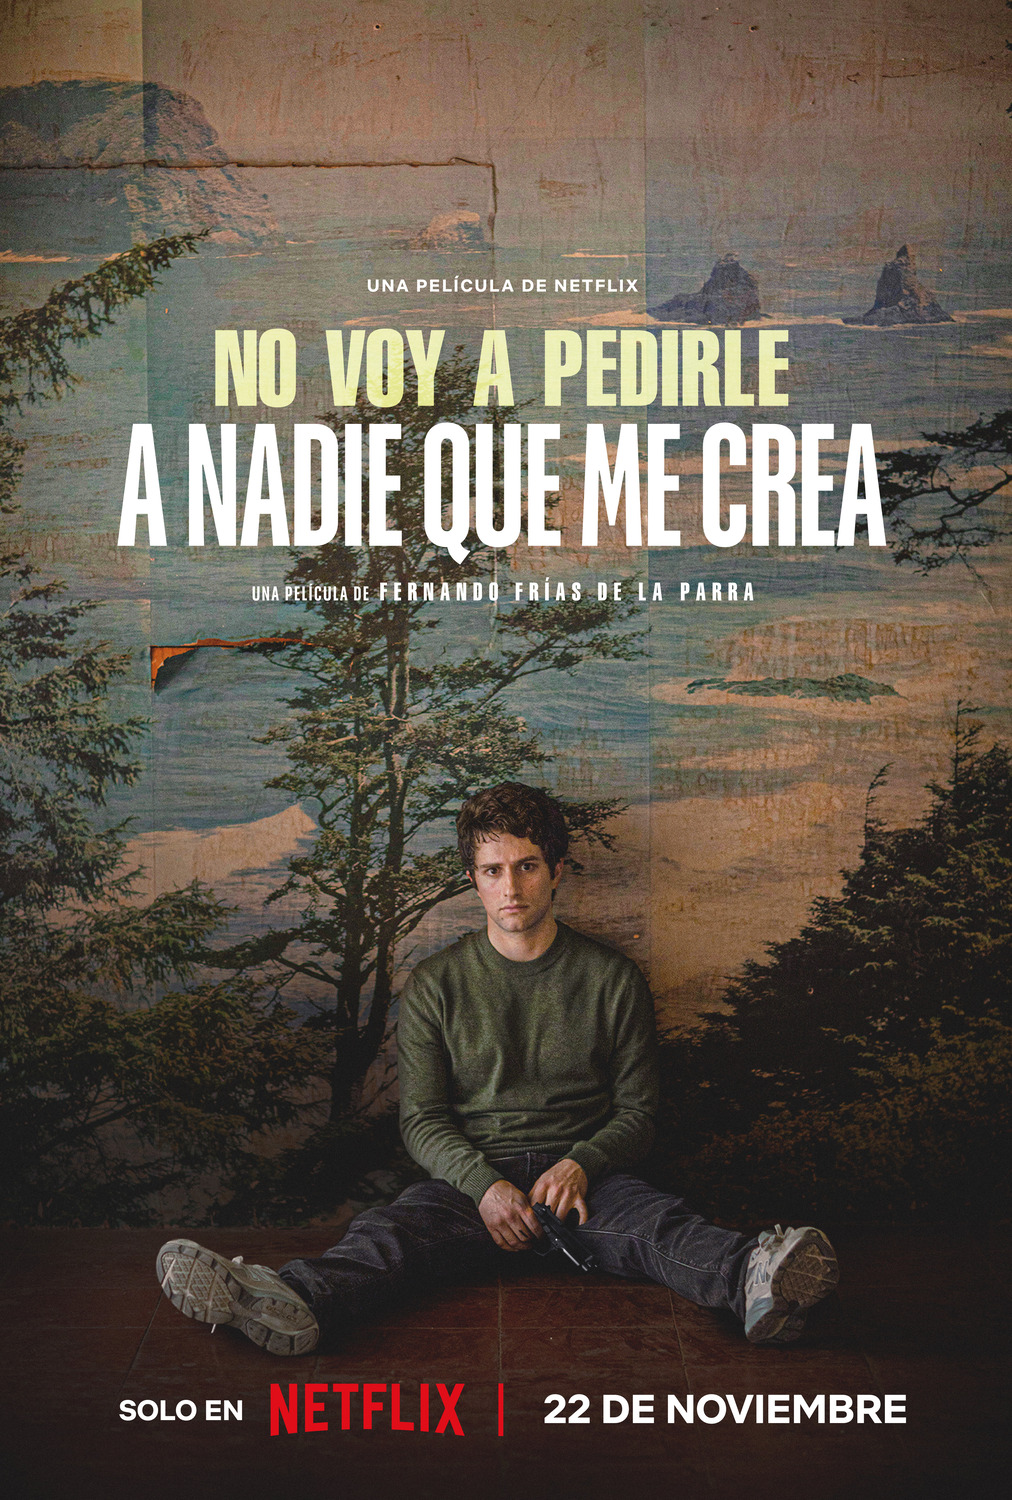 Extra Large Movie Poster Image for No voy a pedirle a nadie que me crea 